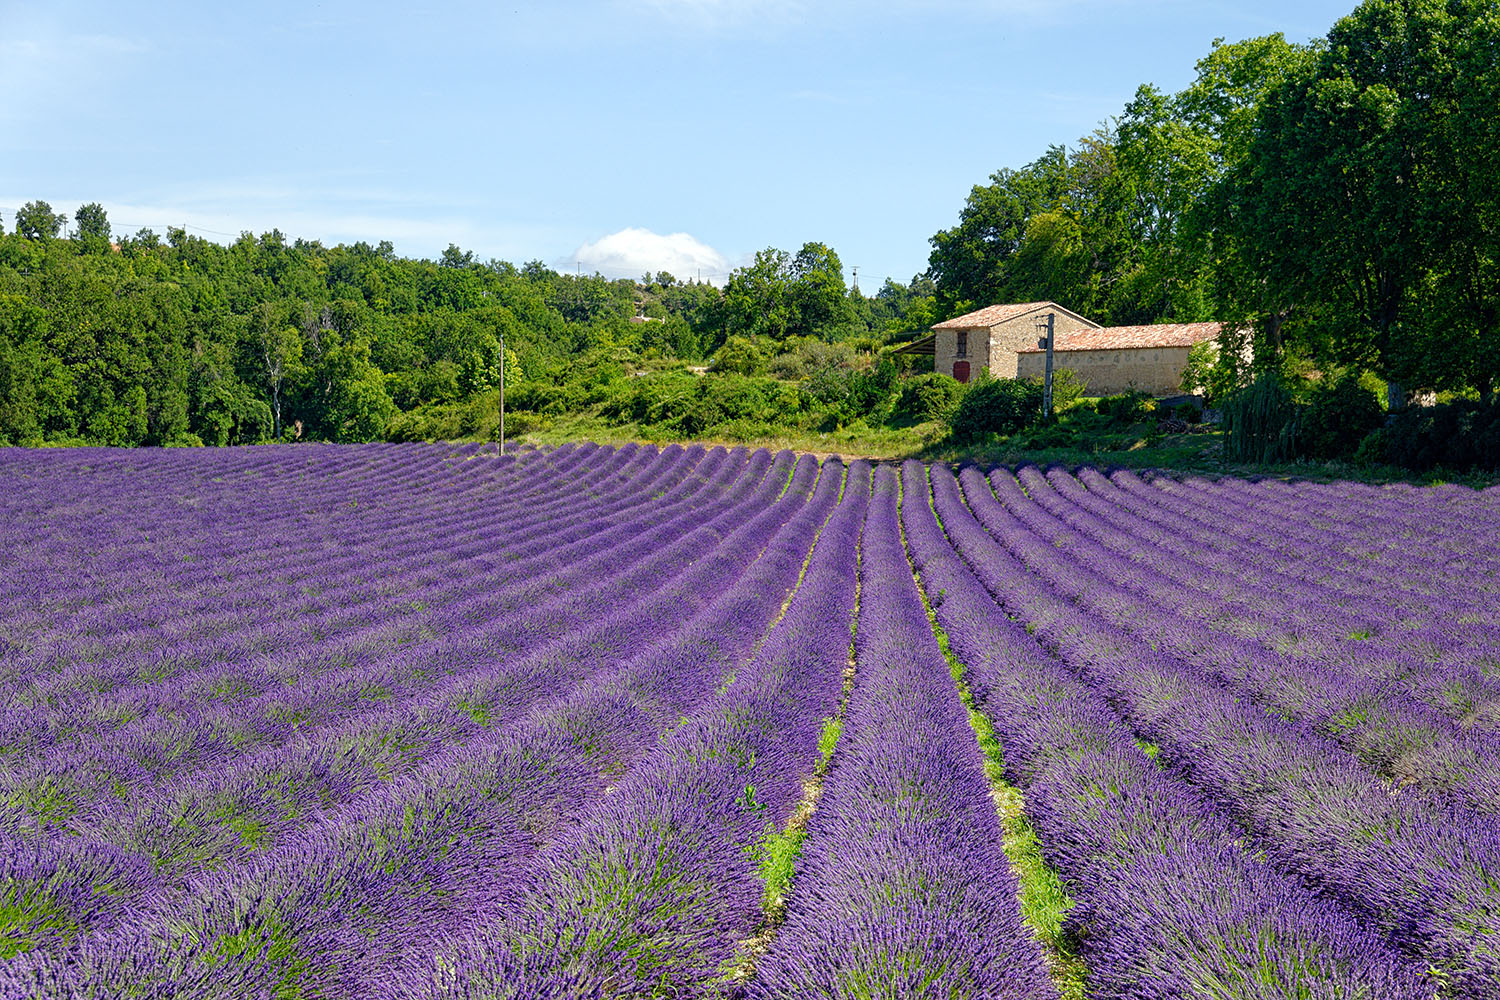 While there are whole meadows where lavender is growing wild, most of it is planted in rows.